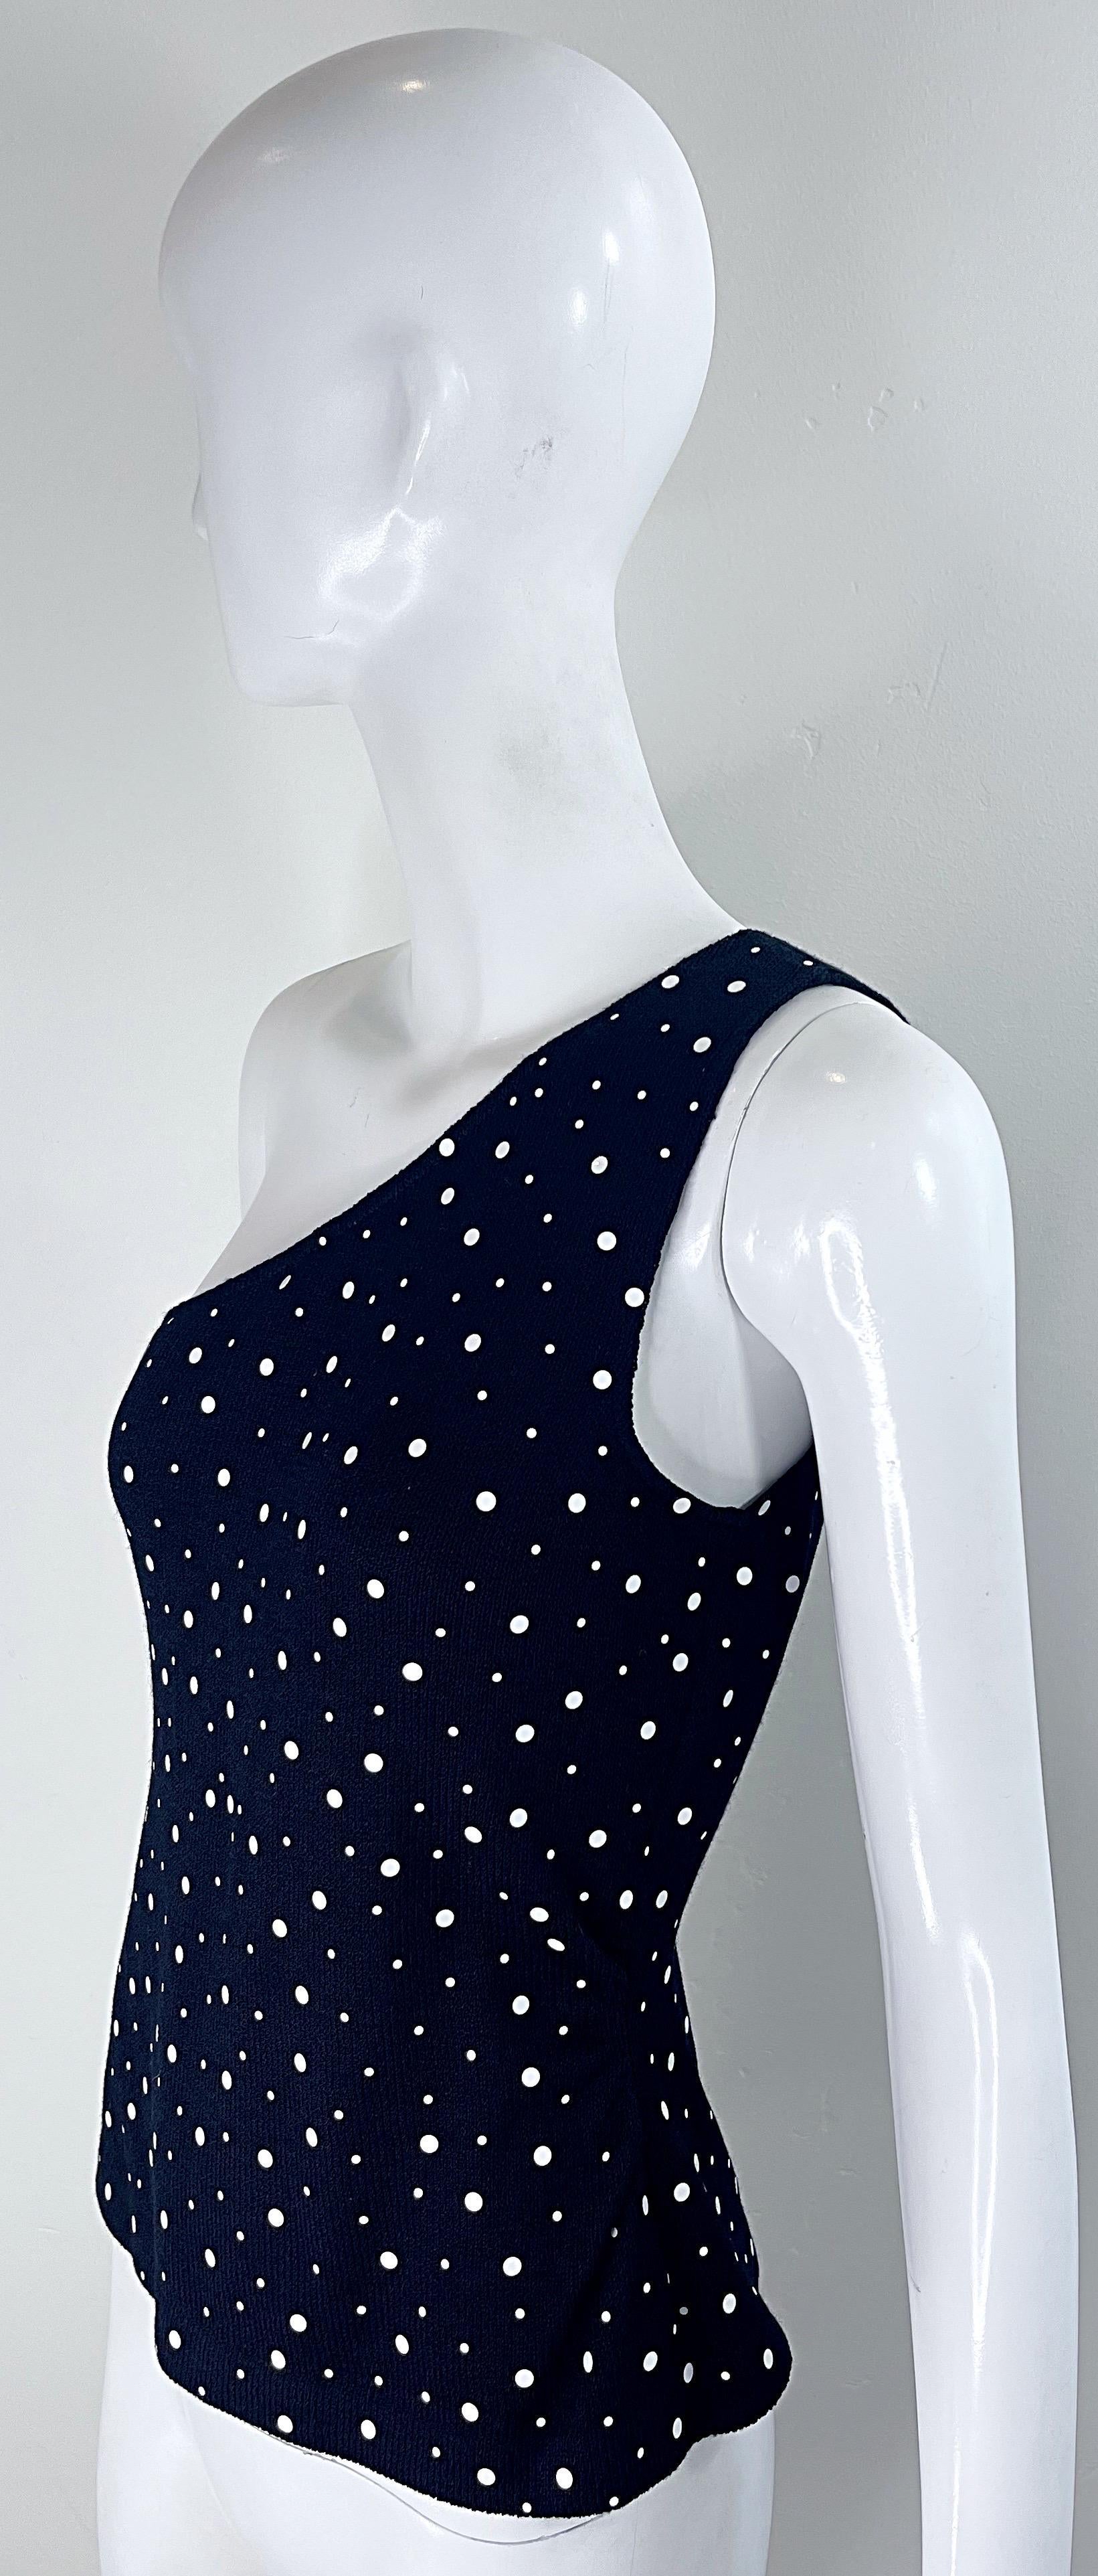 NWT 1990 I. Johns Collection by Marie Gray Size 8 Black White Polka Dot Top en vente 9